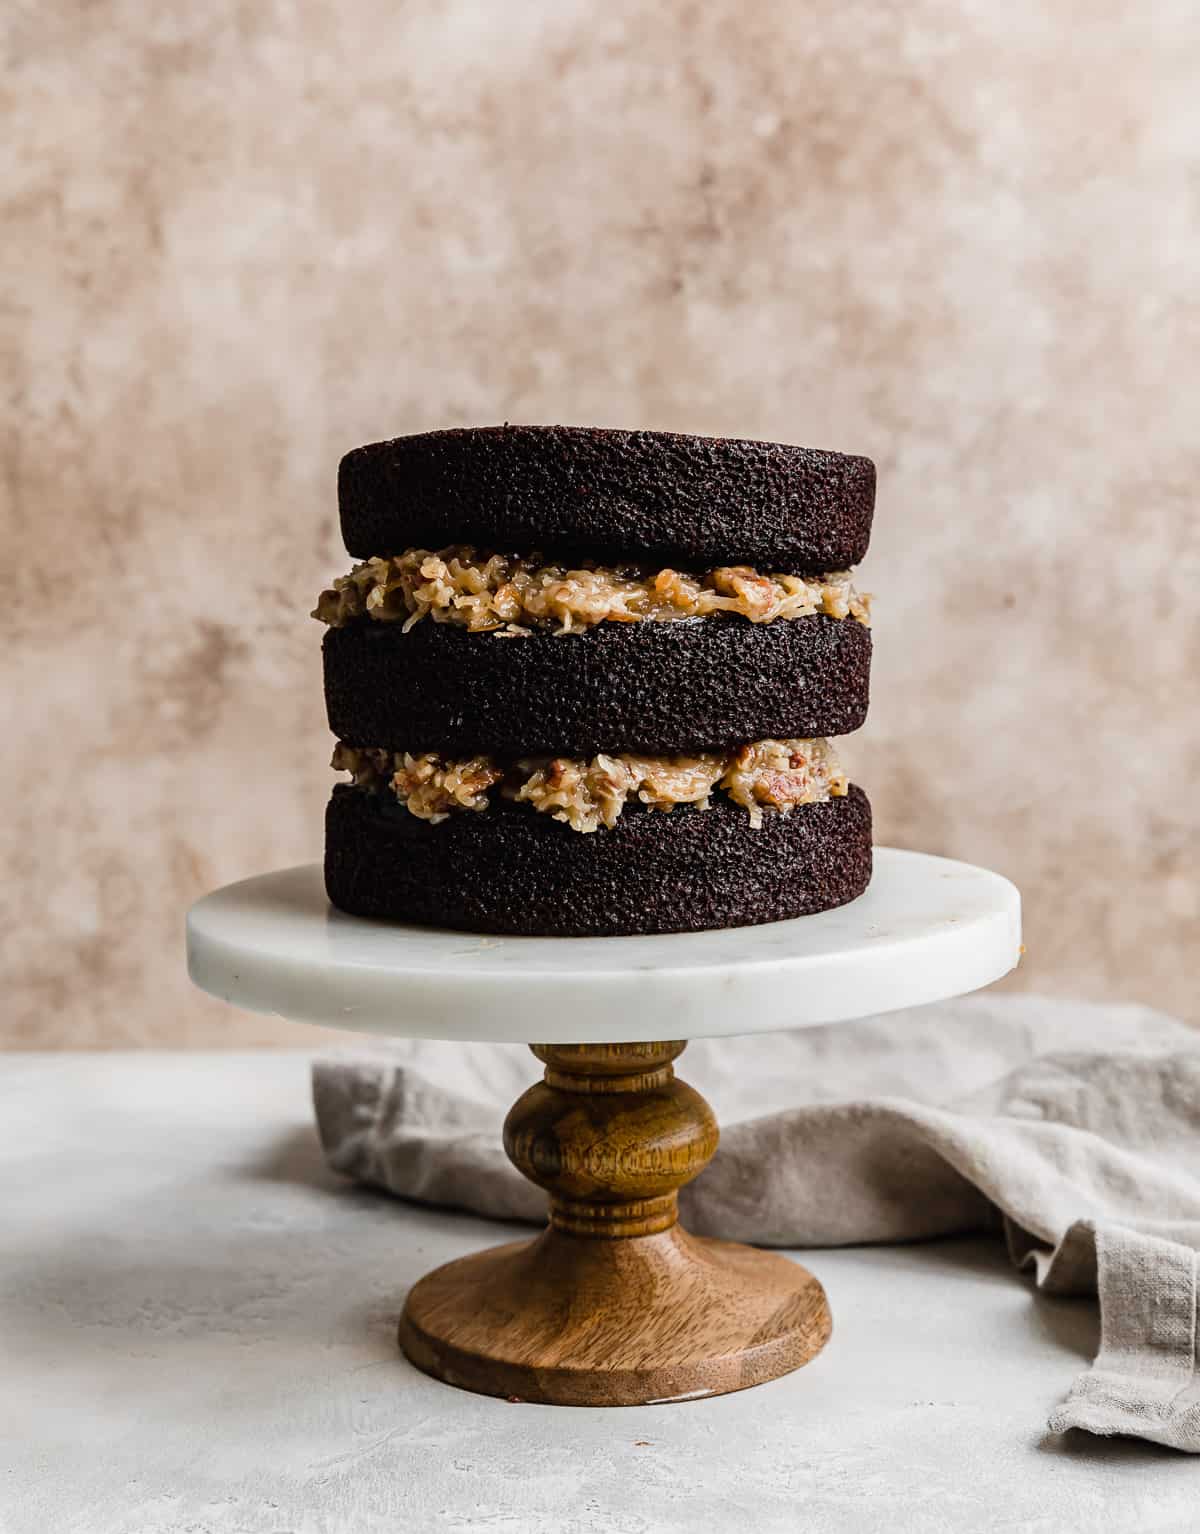 A three tier German chocolate cake with coconut pecan frosting between each layer.